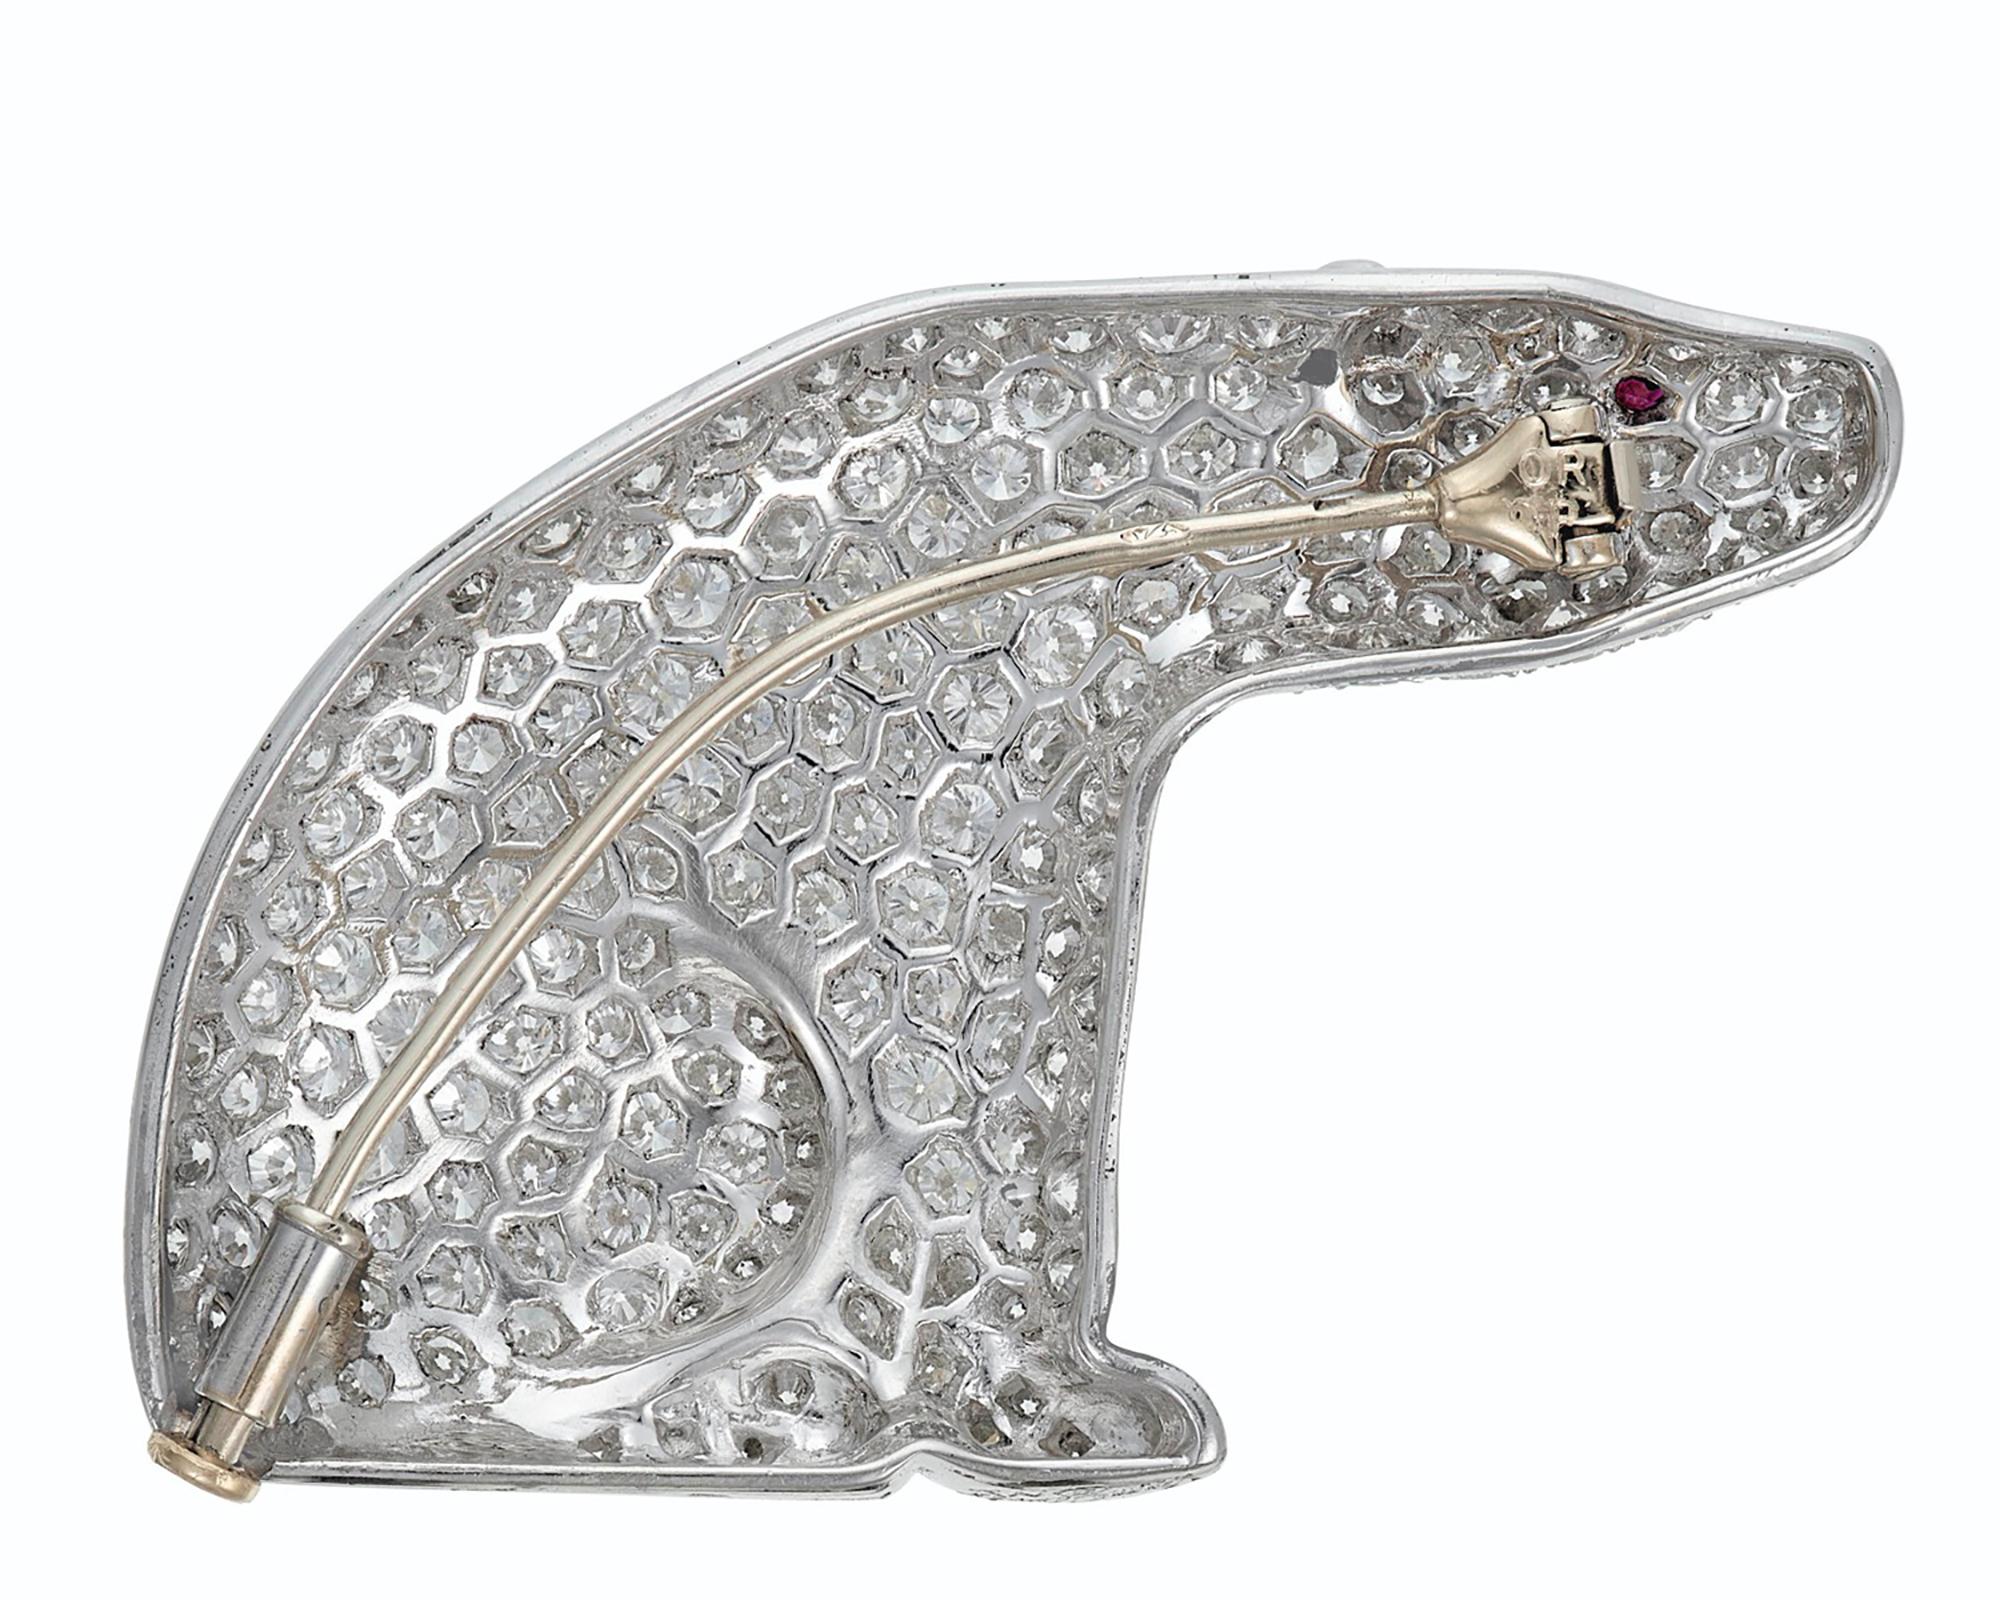 A gorgeous brooch designed as a polar bear and embellished with diamonds and ruby, circa 1970. 
Mounted in platinum.
155 circular-cut diamonds totaling to 3.00-3.50 carats of F-G color, VVS-VS clarity.
Ruby bright and lively, single pinstem.
Signed